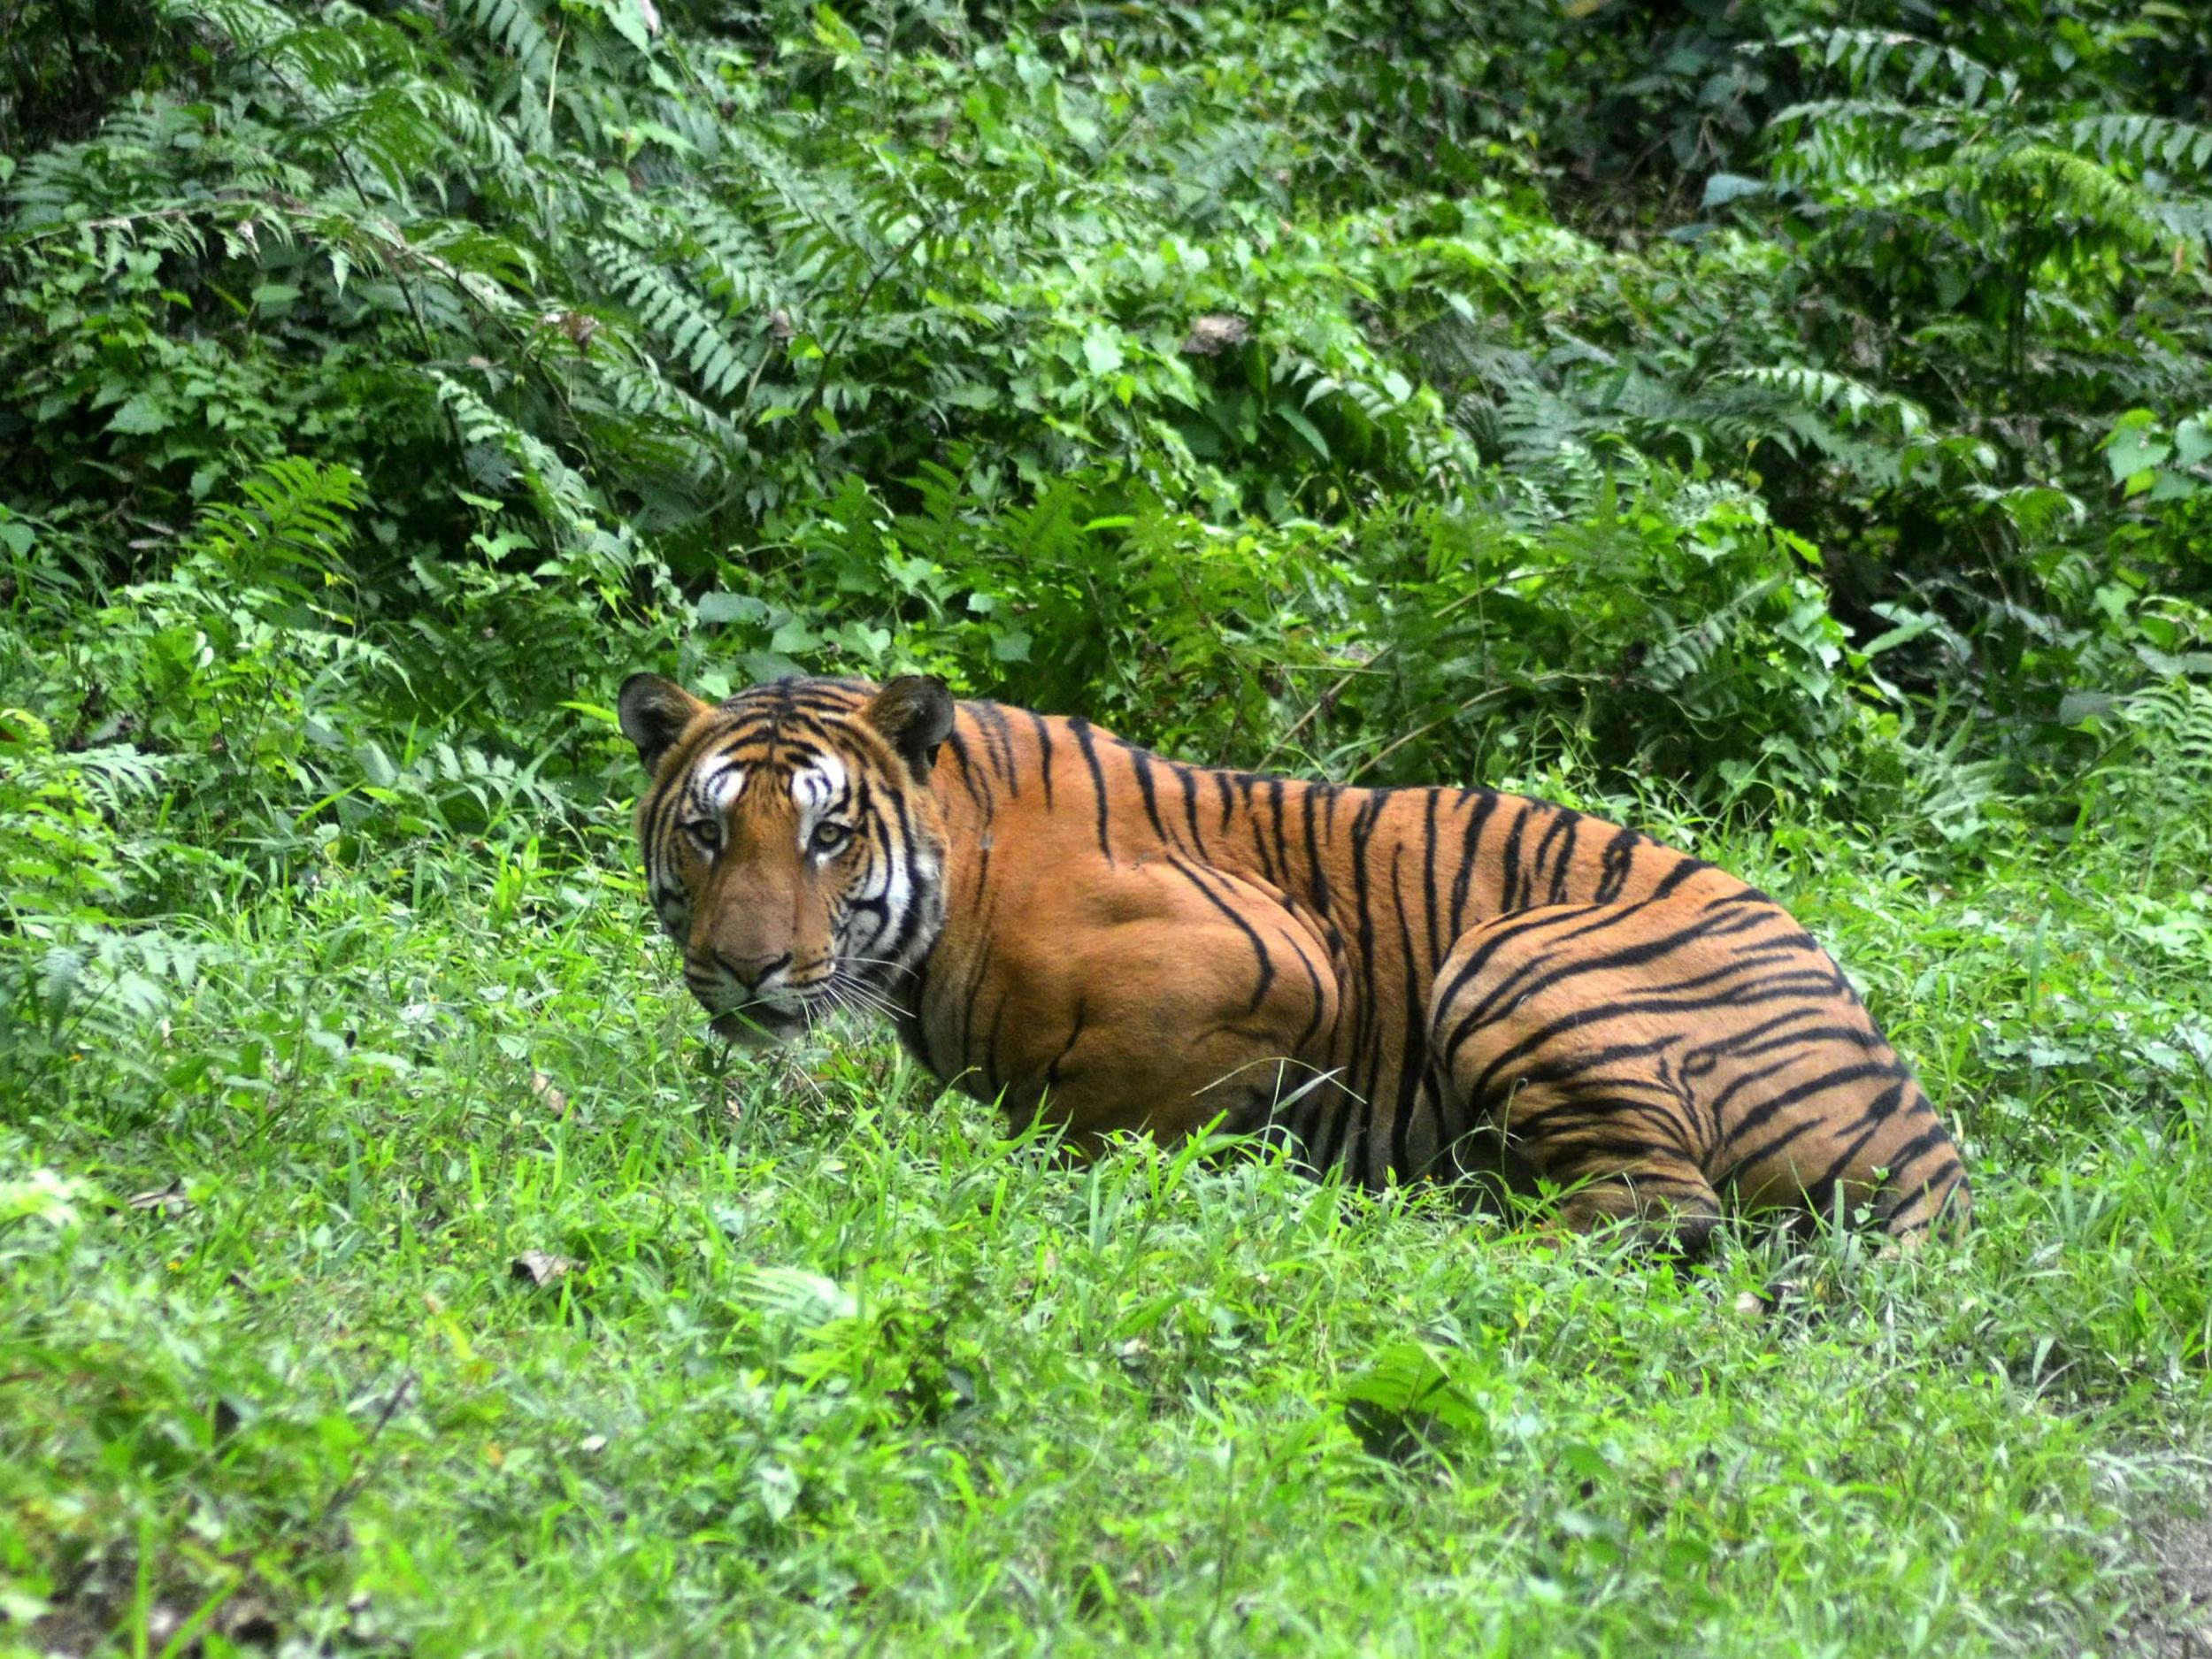 Gerard Van Laar and his Nepalese guide were attacked by a tiger in Bardia National Park